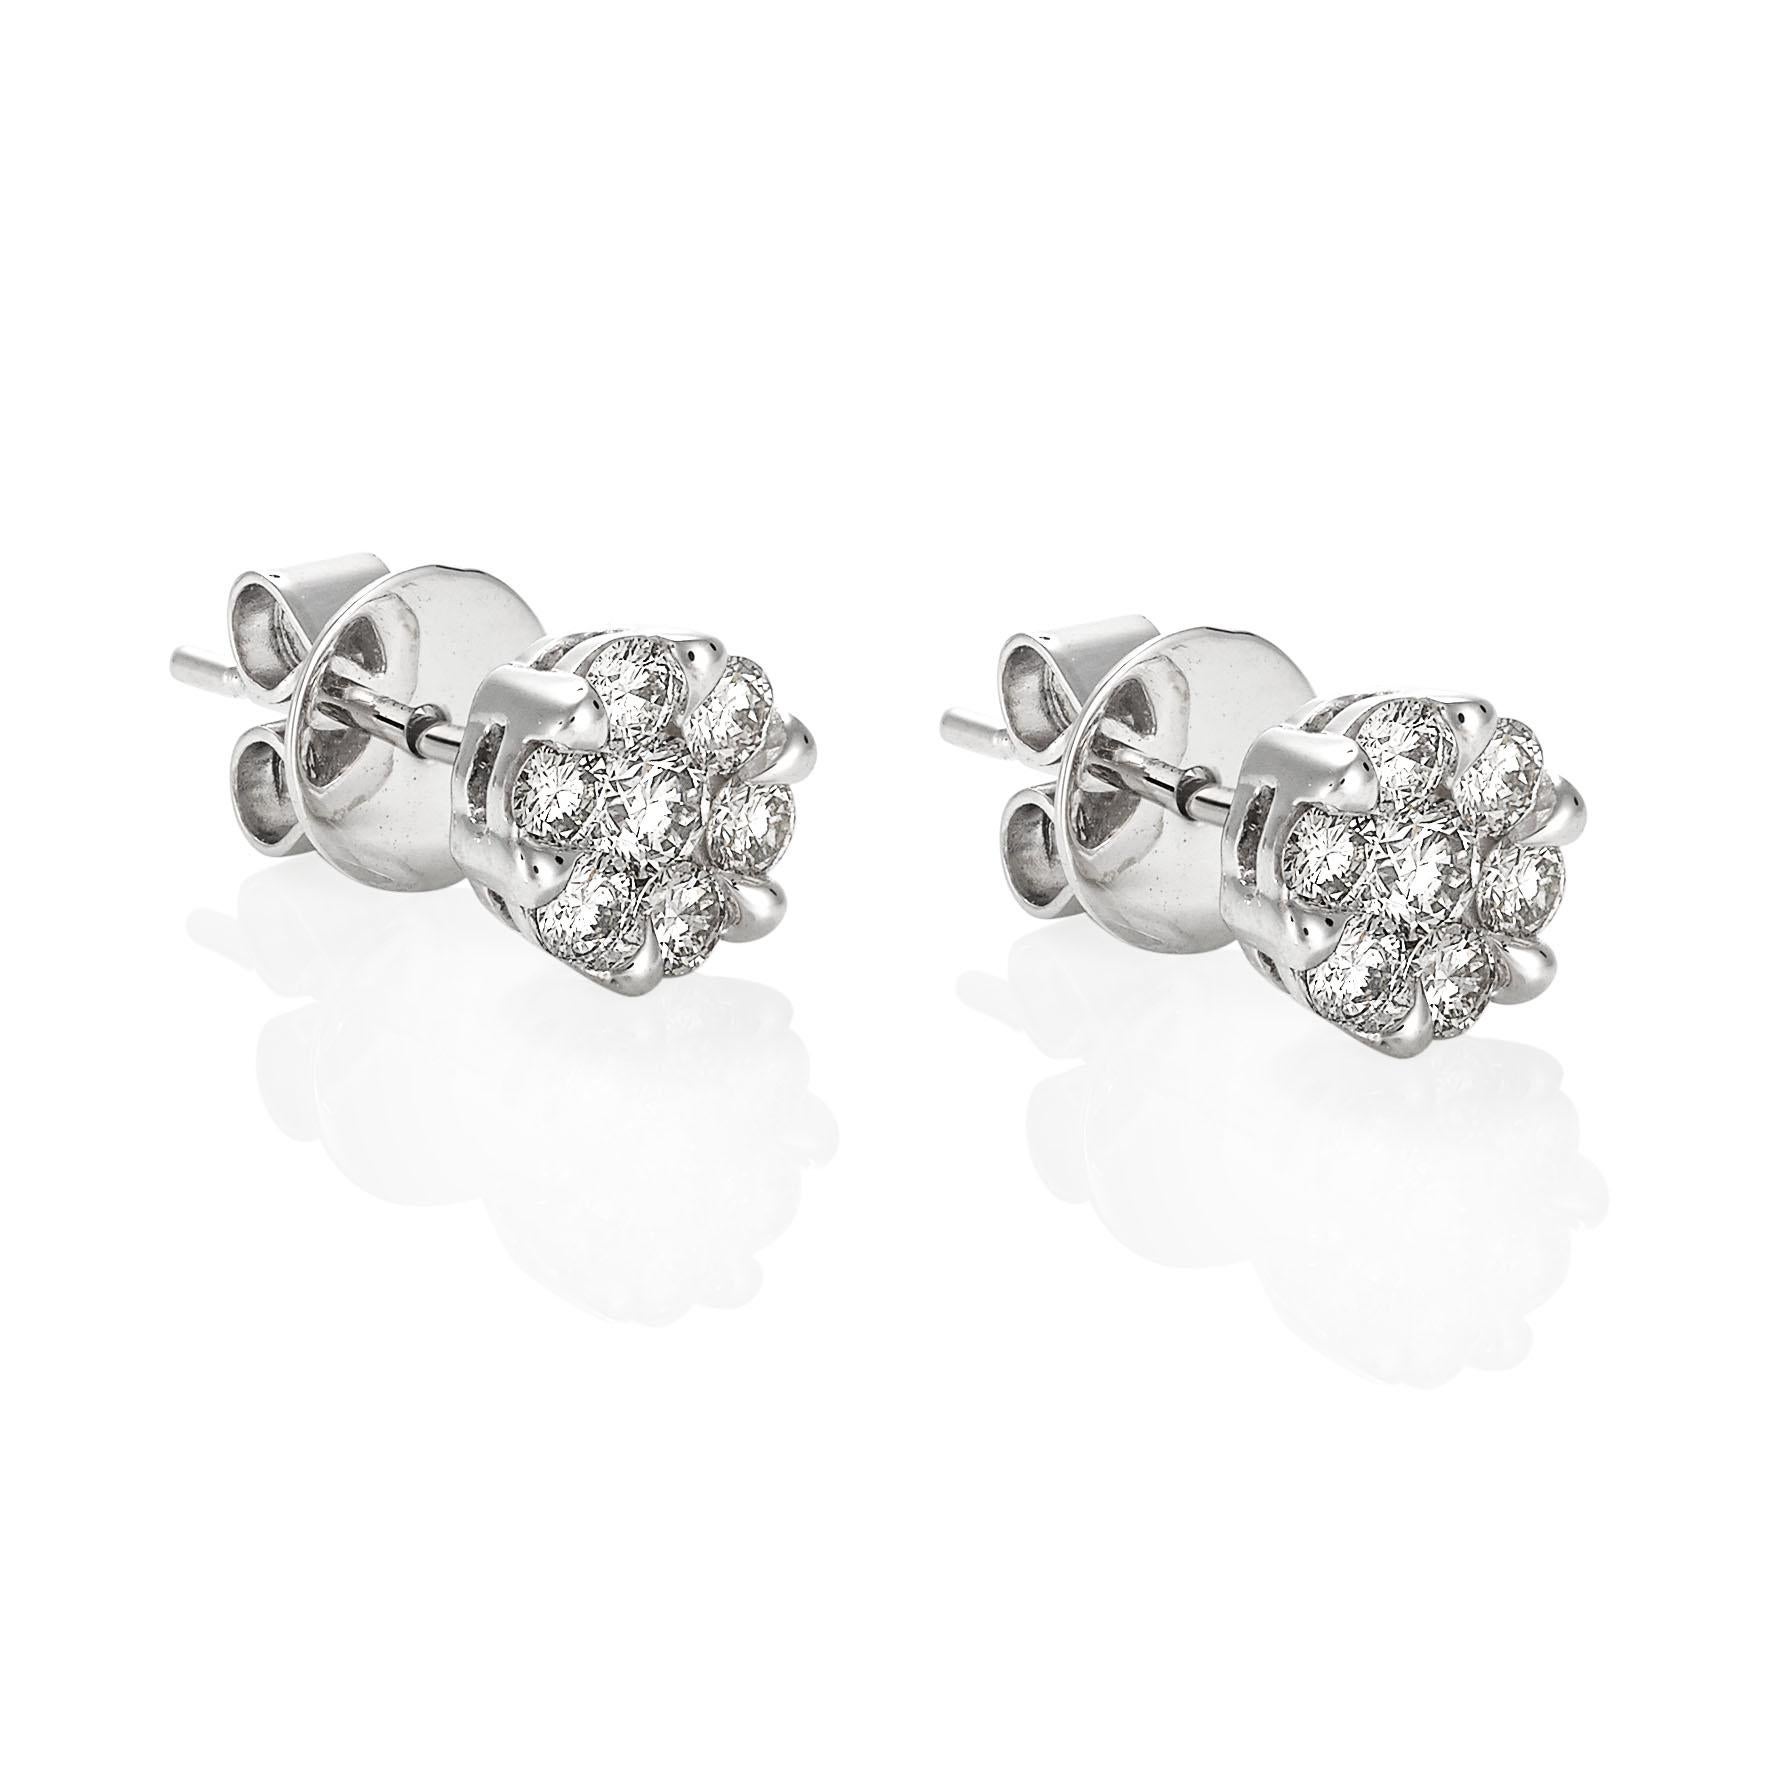 Giulians 18 karat white gold diamond set stud earrings.  Each earring features 6 round brilliant cut diamonds in prong settings and one larger round brilliant cut diamond set in the centre.  The total diamond weight is 14=0.53ct (G-H/VS-Si).  The